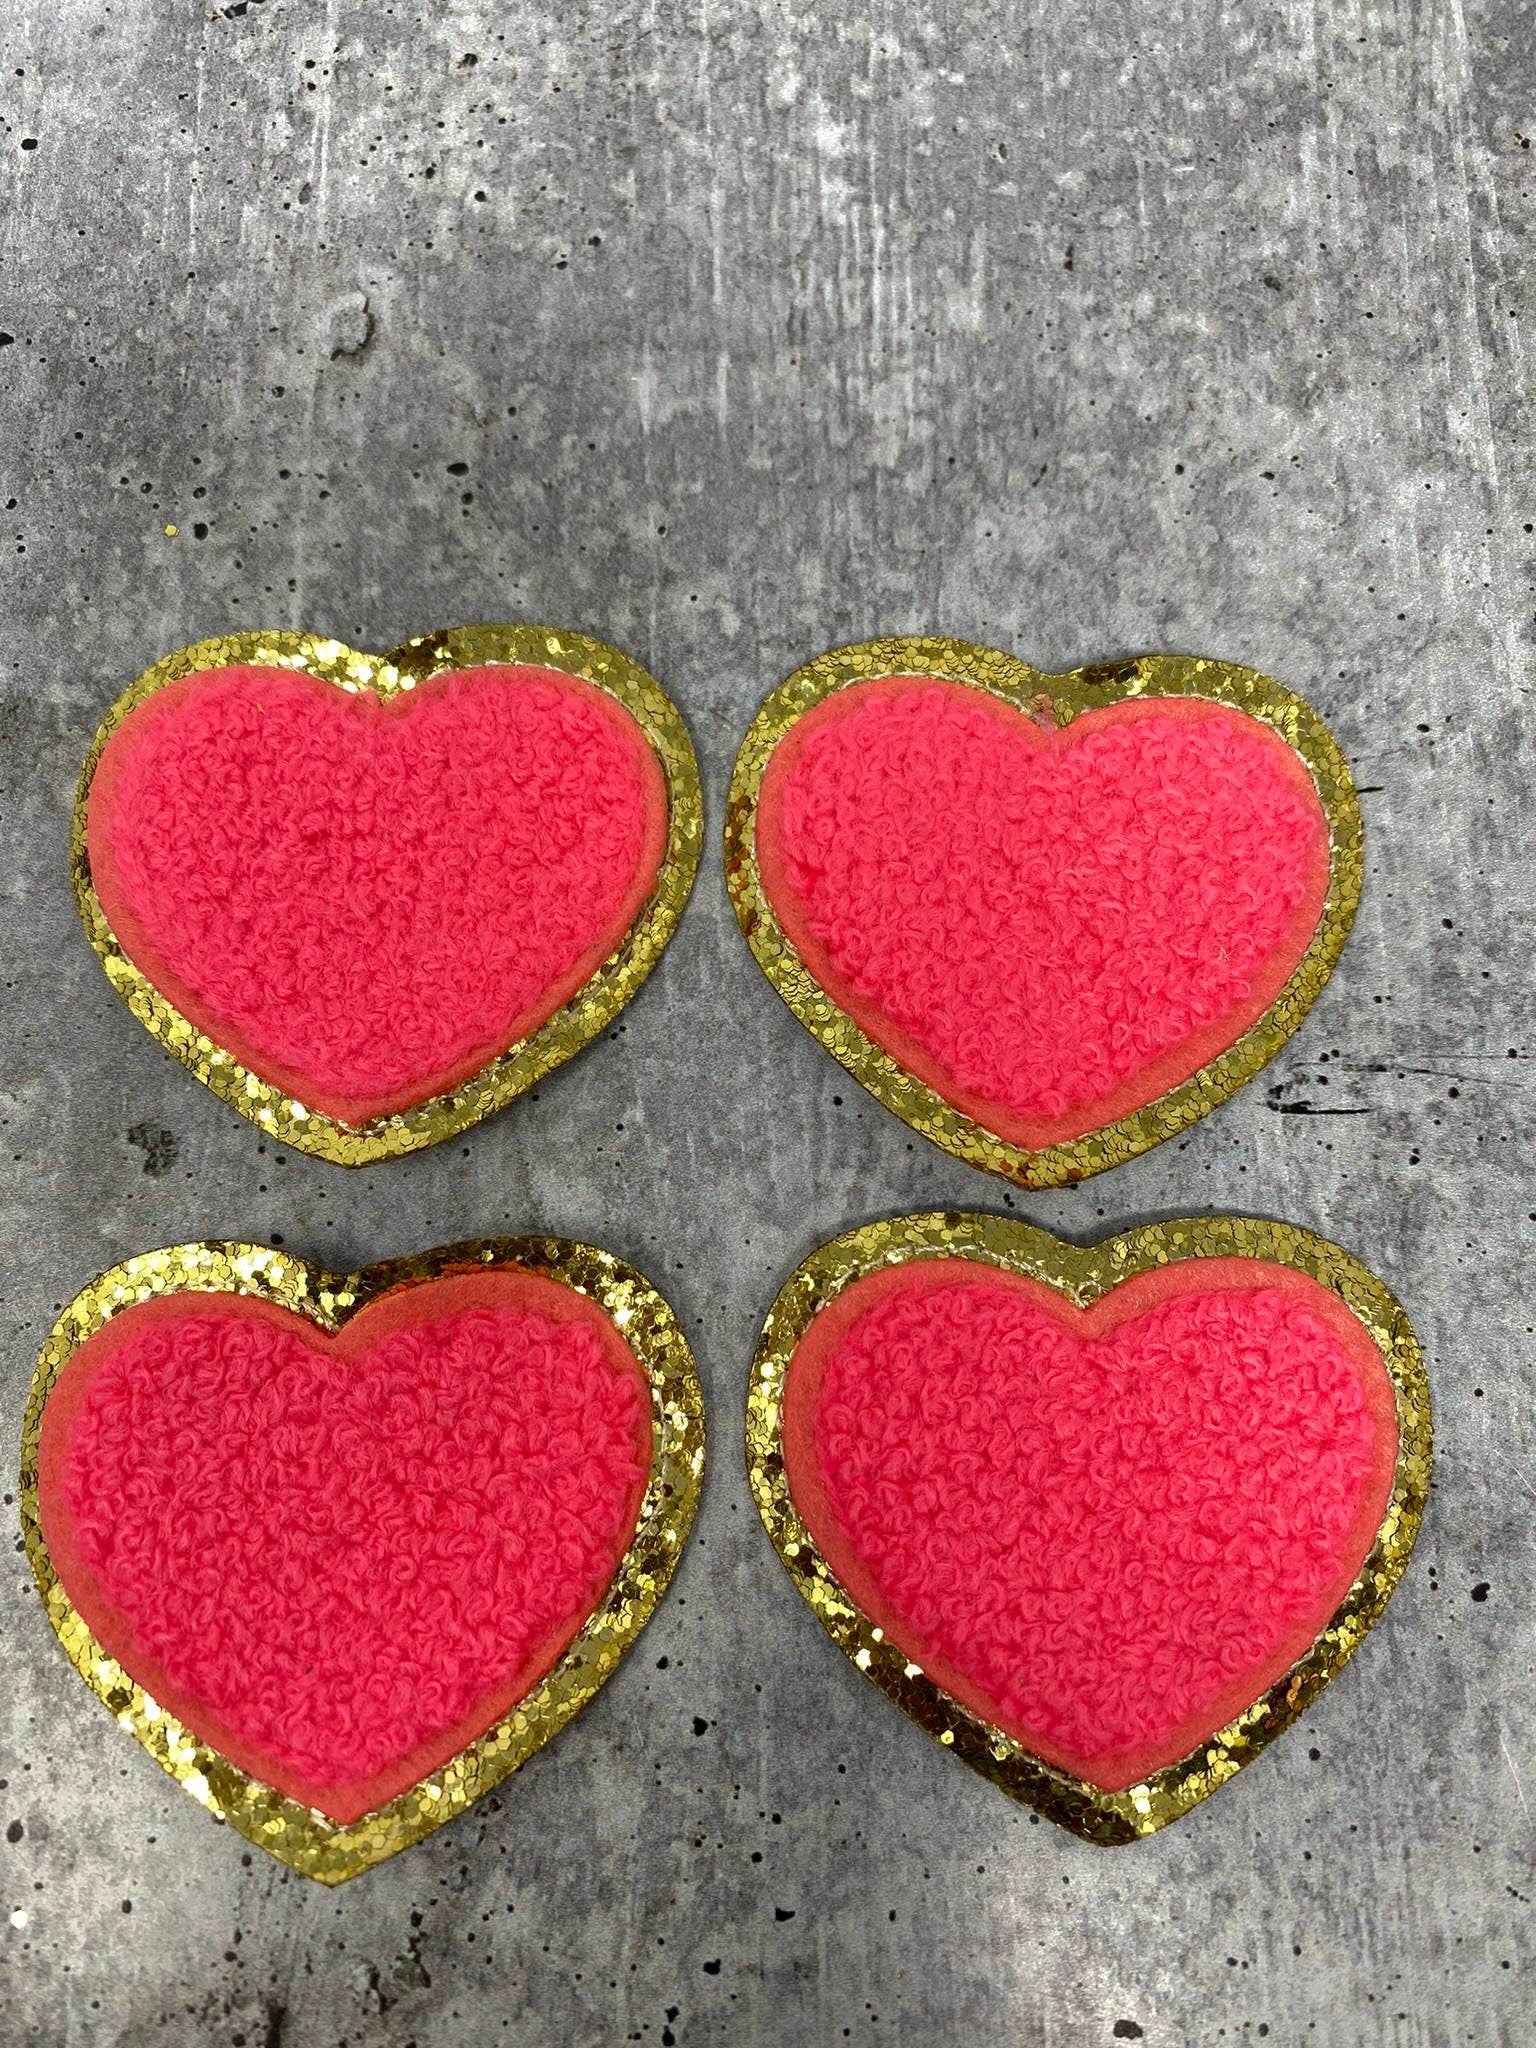 New: NEON Pink, 1-pc,Chenille "Heart" Patch w/Gold Glitter, Size 2.5", Love Badge, Heart Patch w/ Iron-on Backing, Fuzzy Applique, DIY Patch